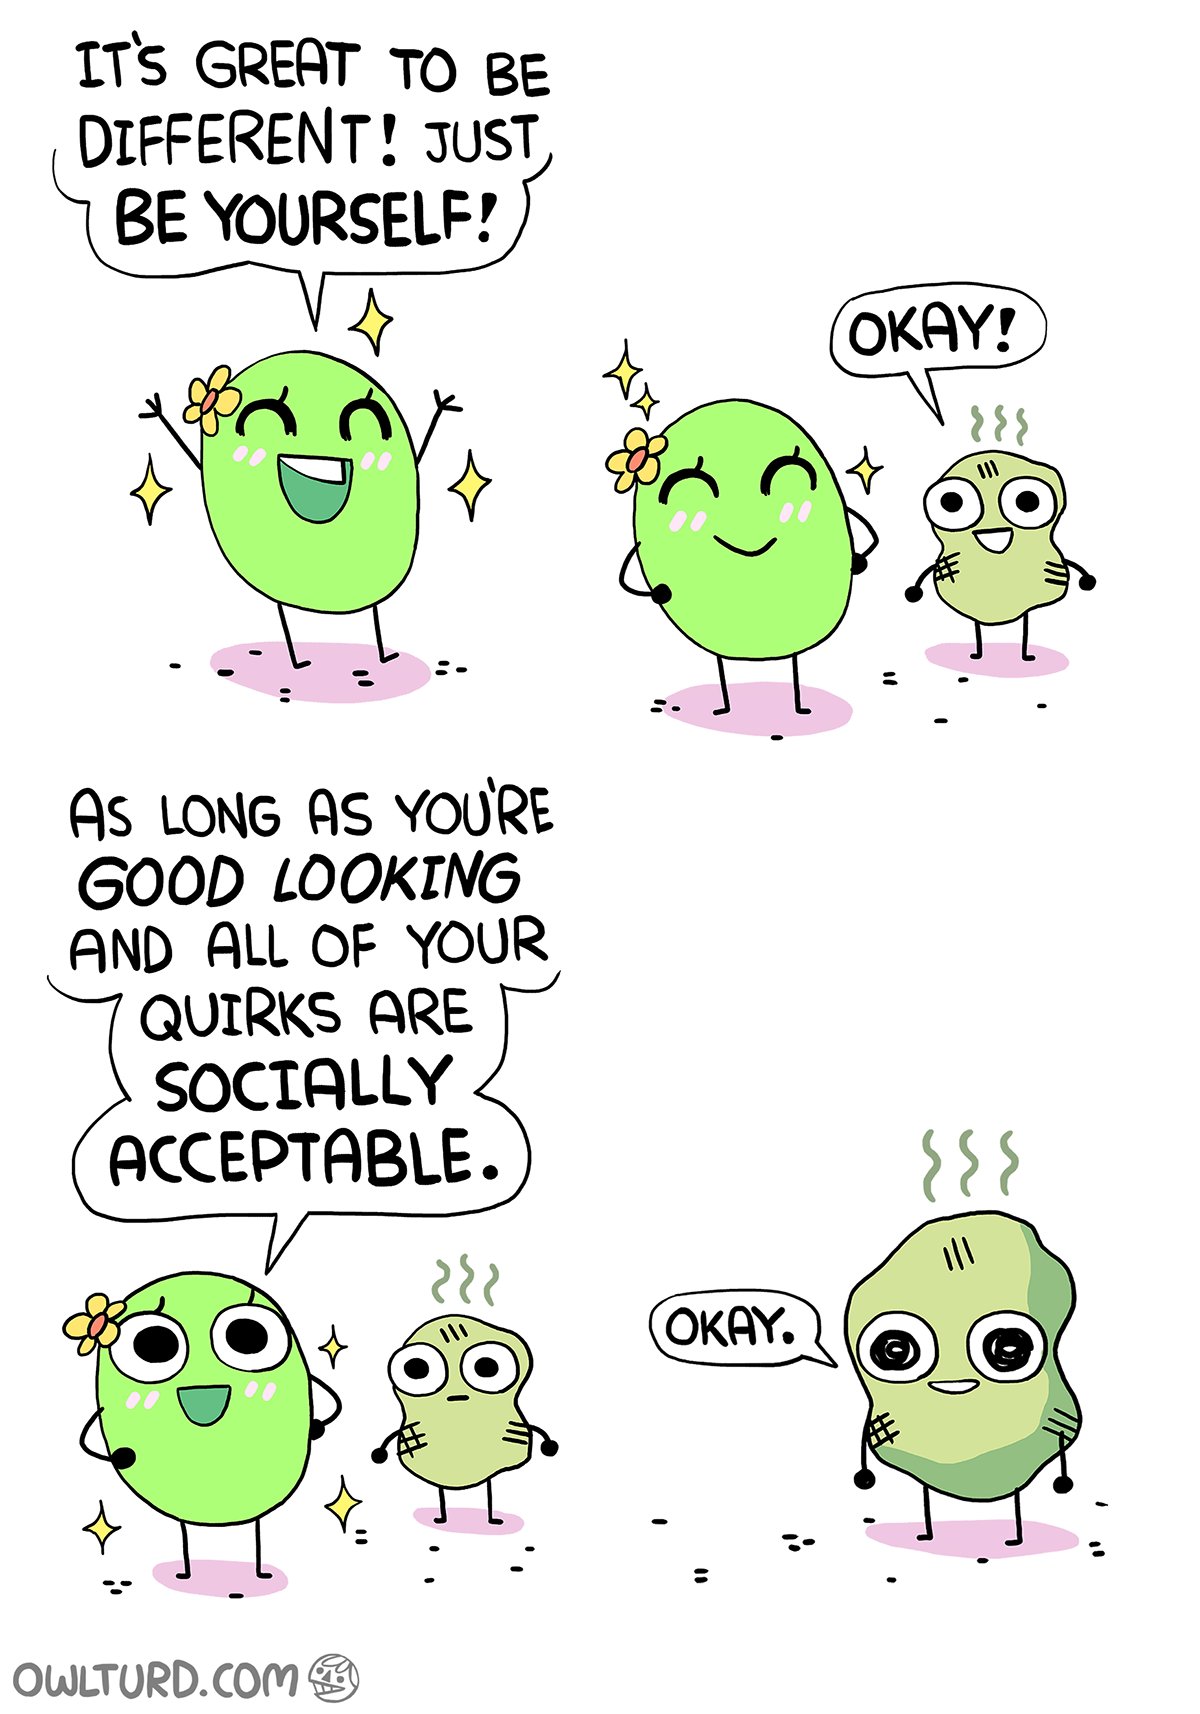 memes - being yourself comics - It'S Great To Be Different! Just Be Yourself! Okay! As Long As You'Re Good Looking And All Of Your 7 Quirks Are Socially Acceptable. Okay. Owlturd.Com